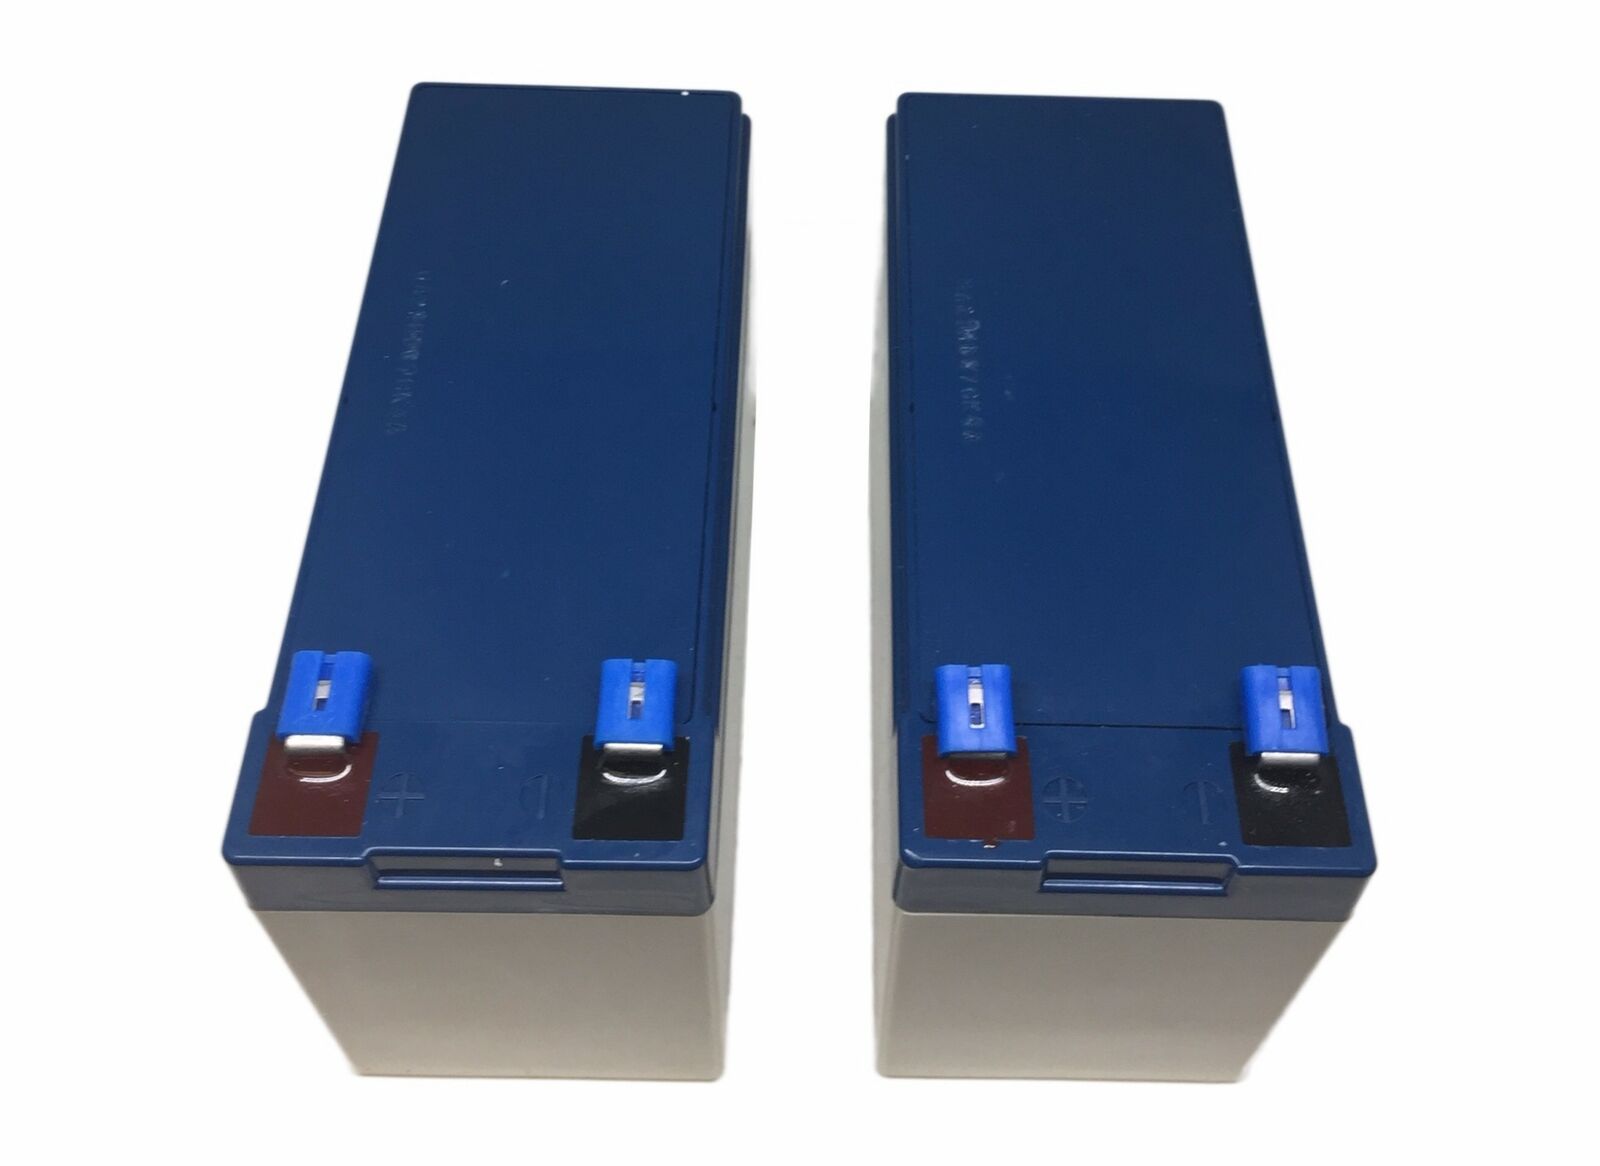 CyberPower RB1280X2A Battery Kit, Also Fits RB1280X2B, and PP1500SWT2 Model